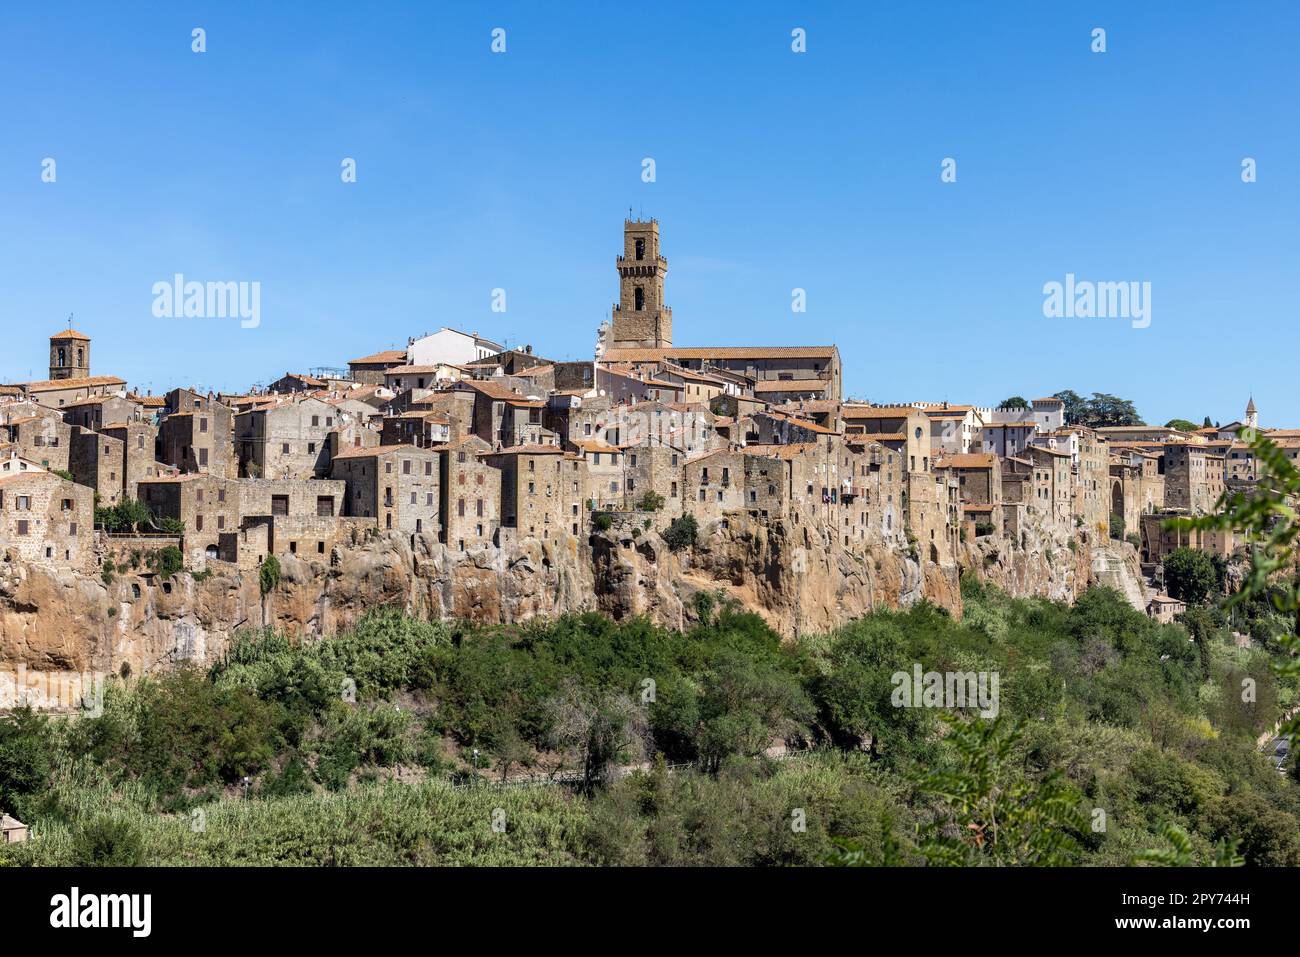 Pitigliano charming medieval town in Tuscany, Italy. Stock Photo